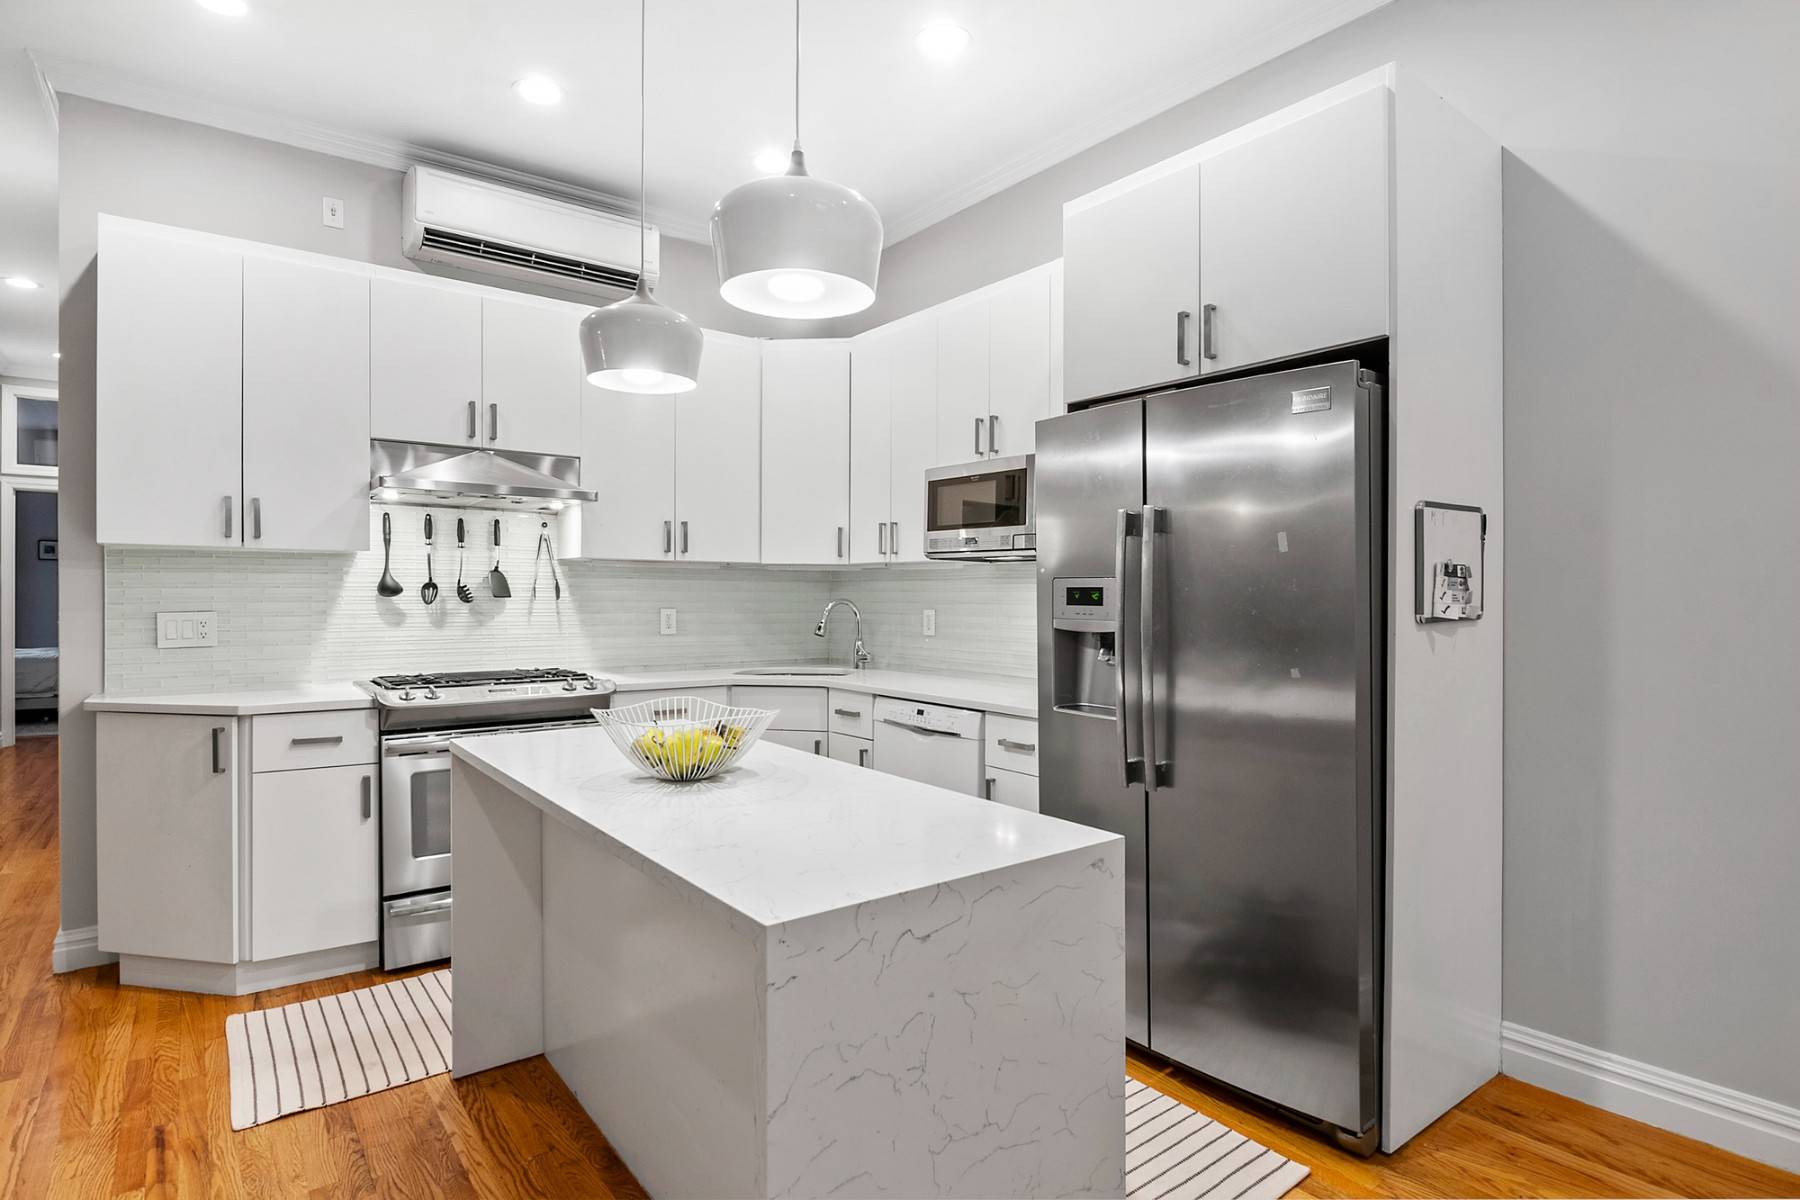 Situated in an impeccably maintained brownstone in premier Boerum Hill, this 4 bedroom, 3 full bathroom duplex with a private garden is an incredible Brooklyn gem.